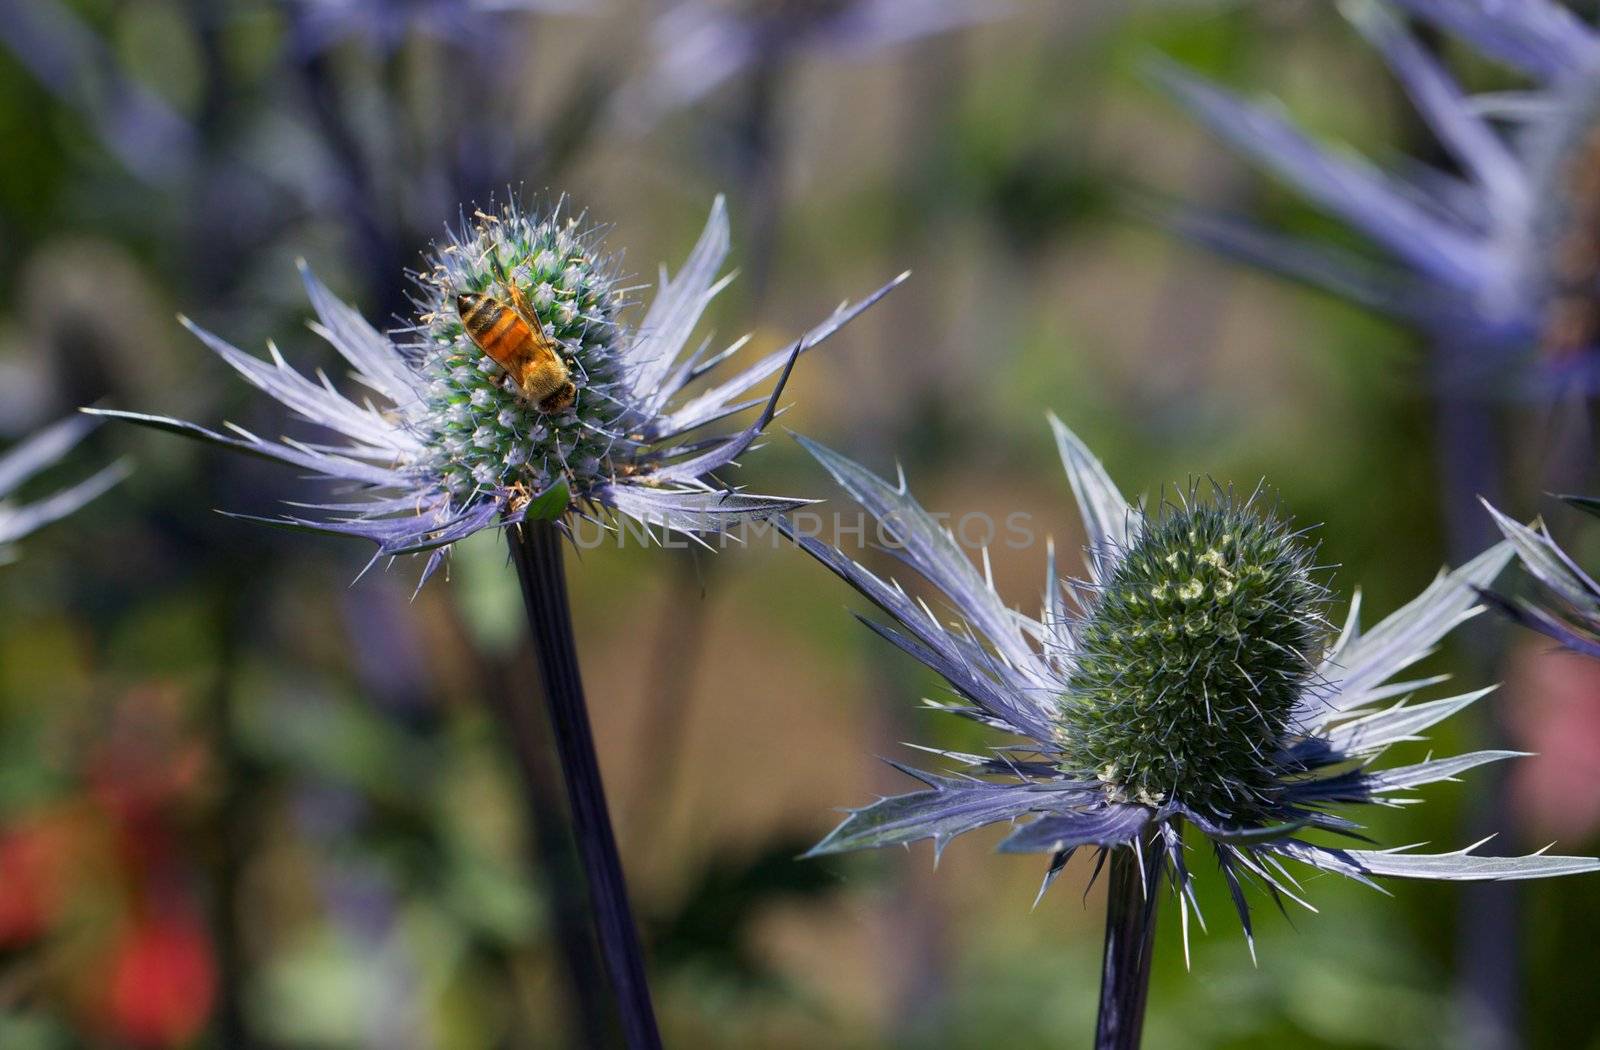 Another Busy bee on Eryngium by bobkeenan